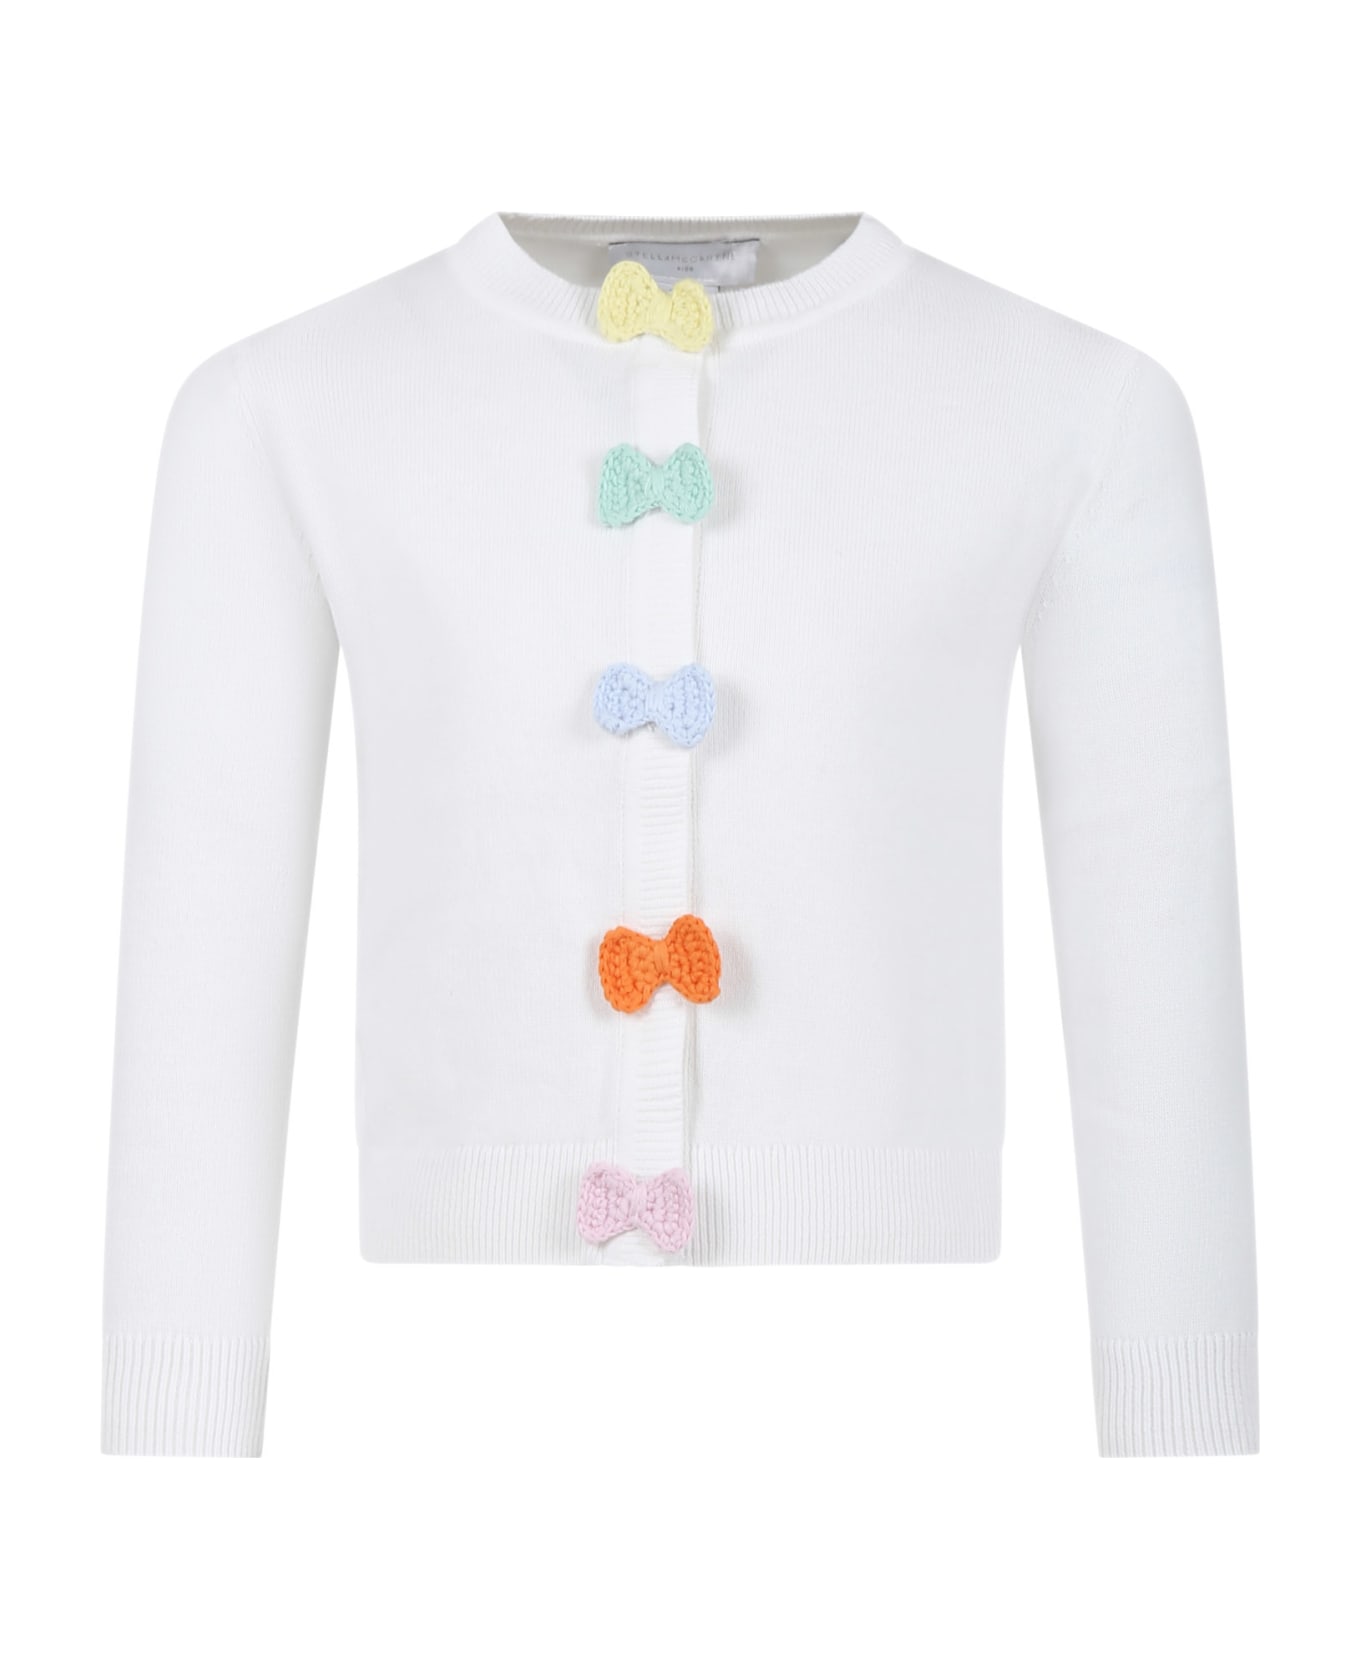 Stella McCartney Kids White Cardigan For Girl With Multicolor Bows - White